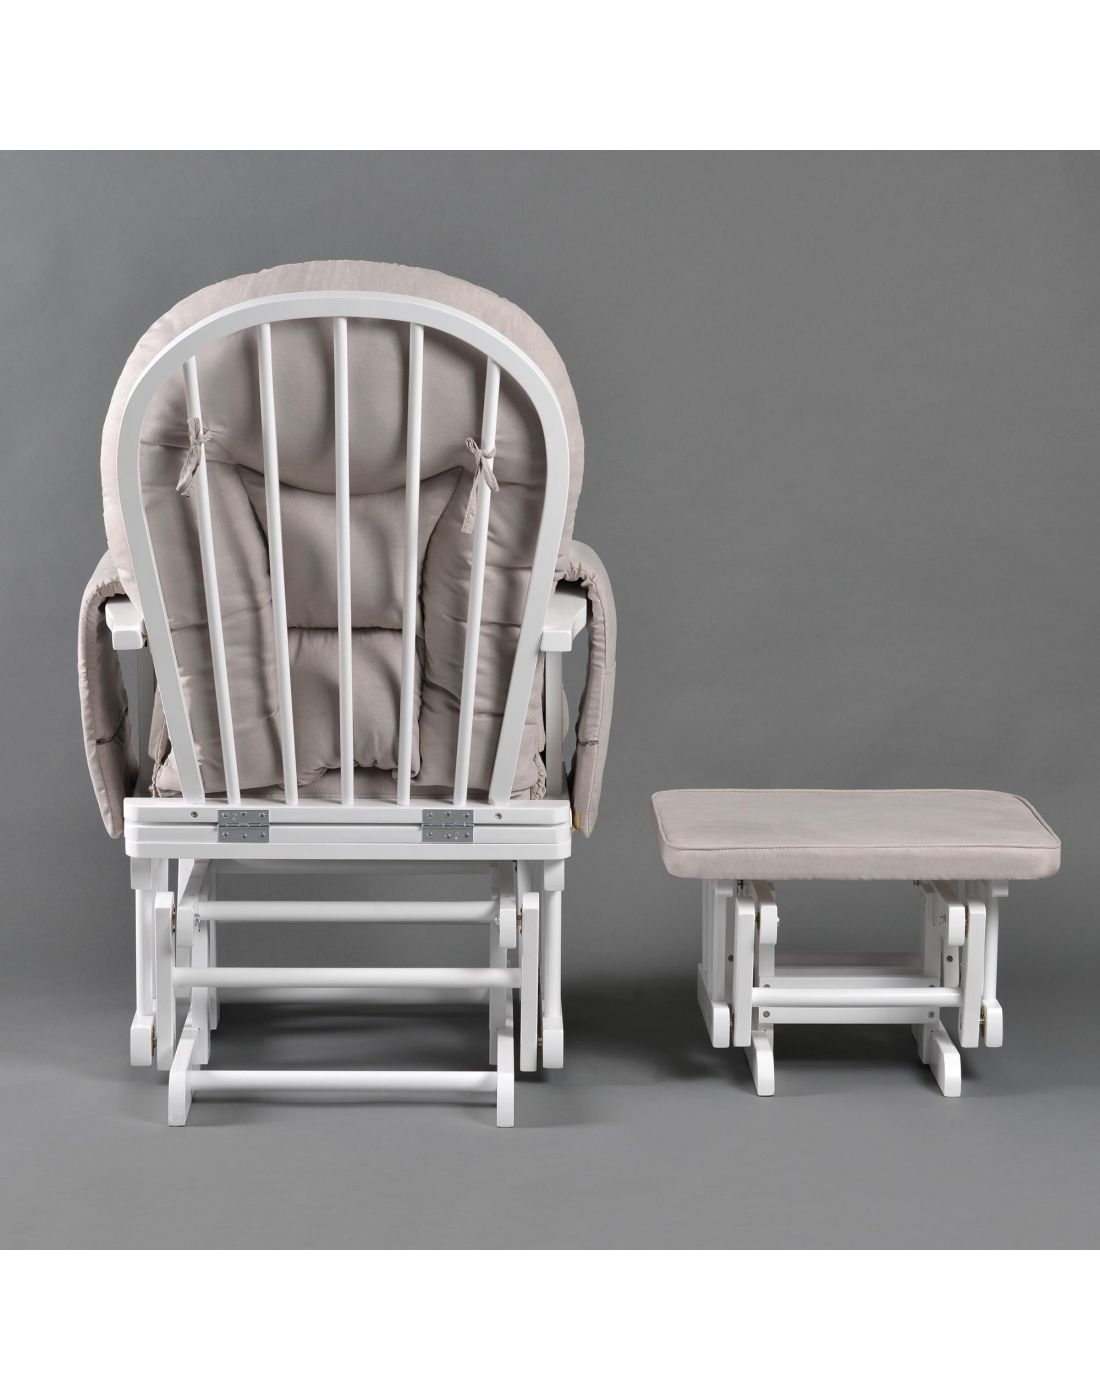 Baby Adventure Glinding Chair White With Grey Fabric